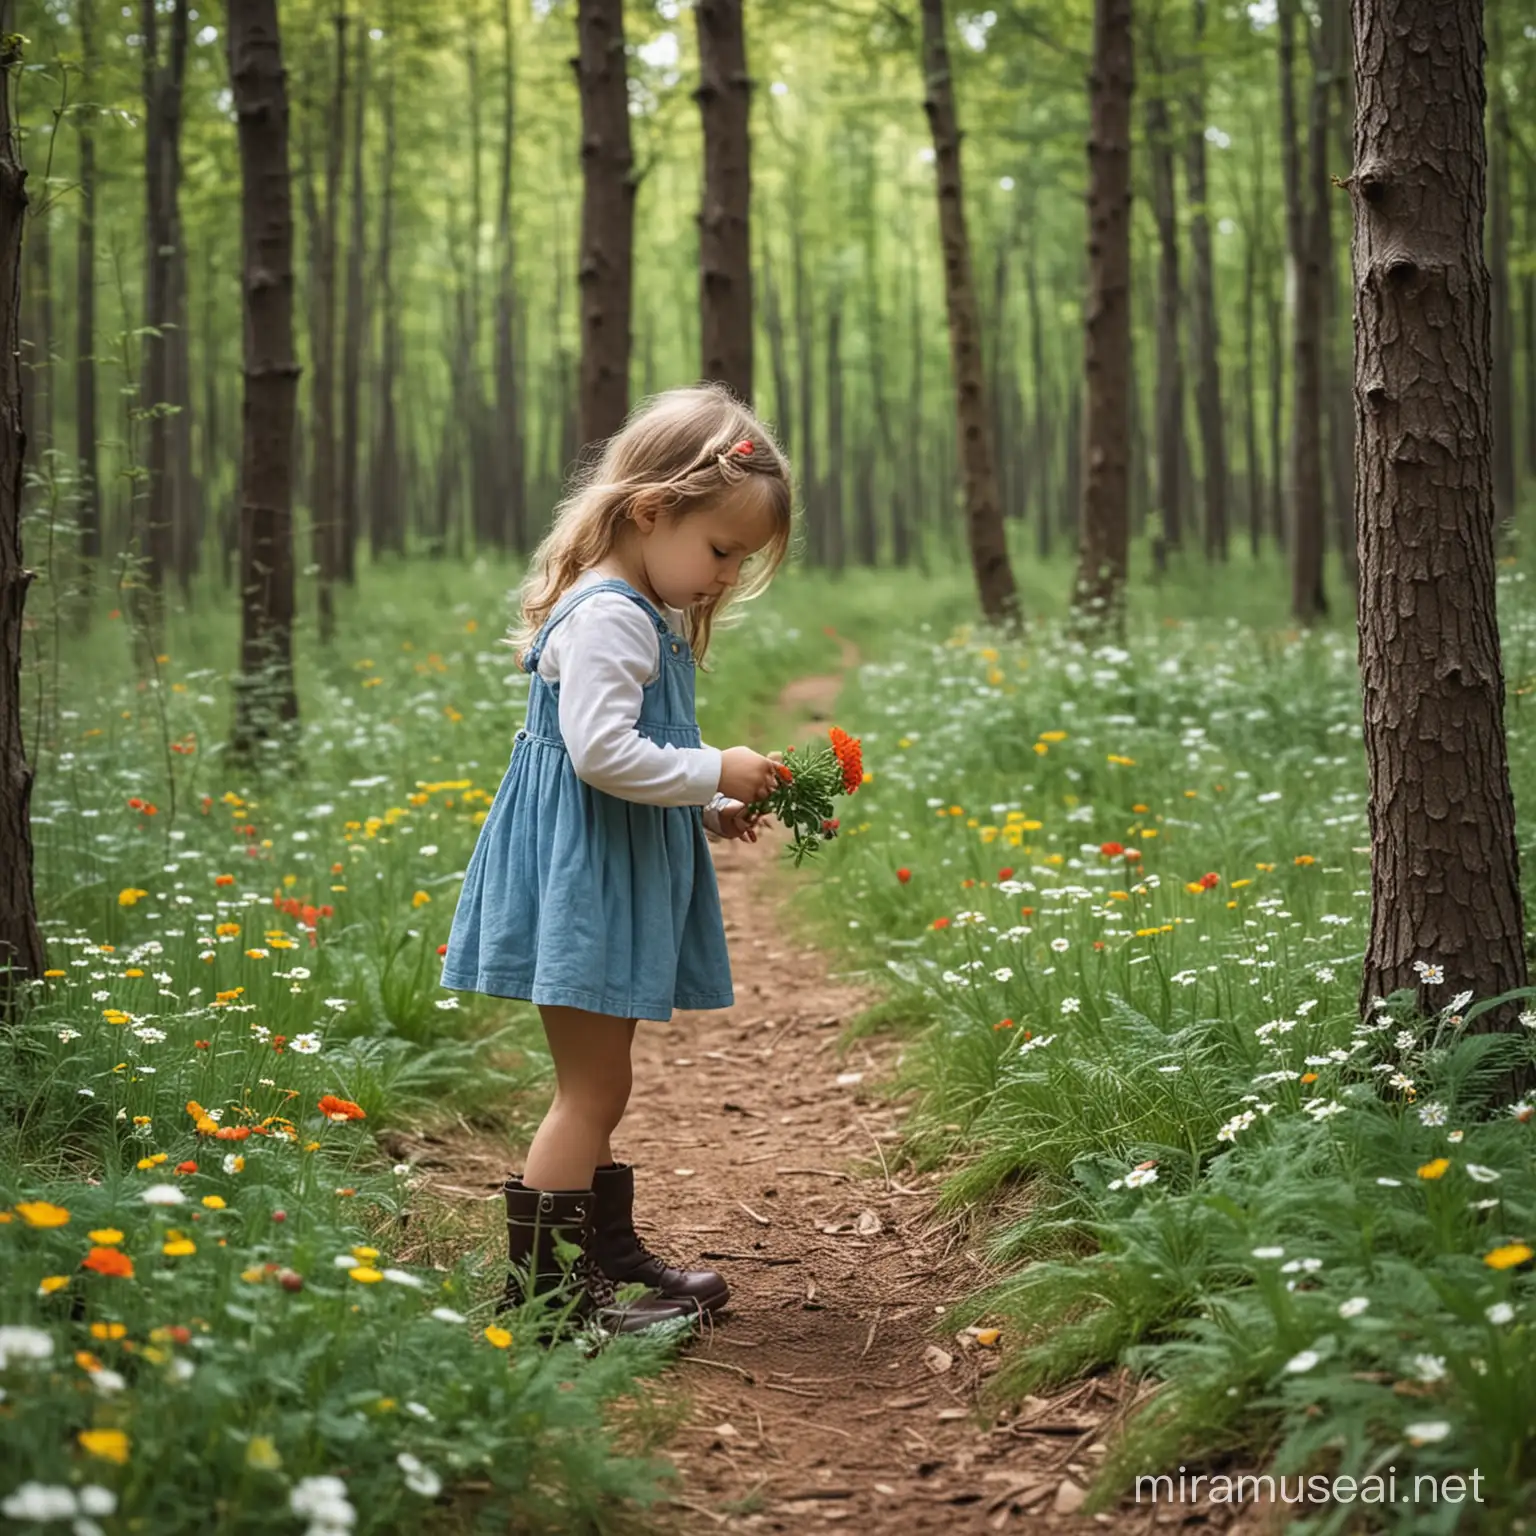 Young Girl Gathering Wildflowers in Enchanted Forest